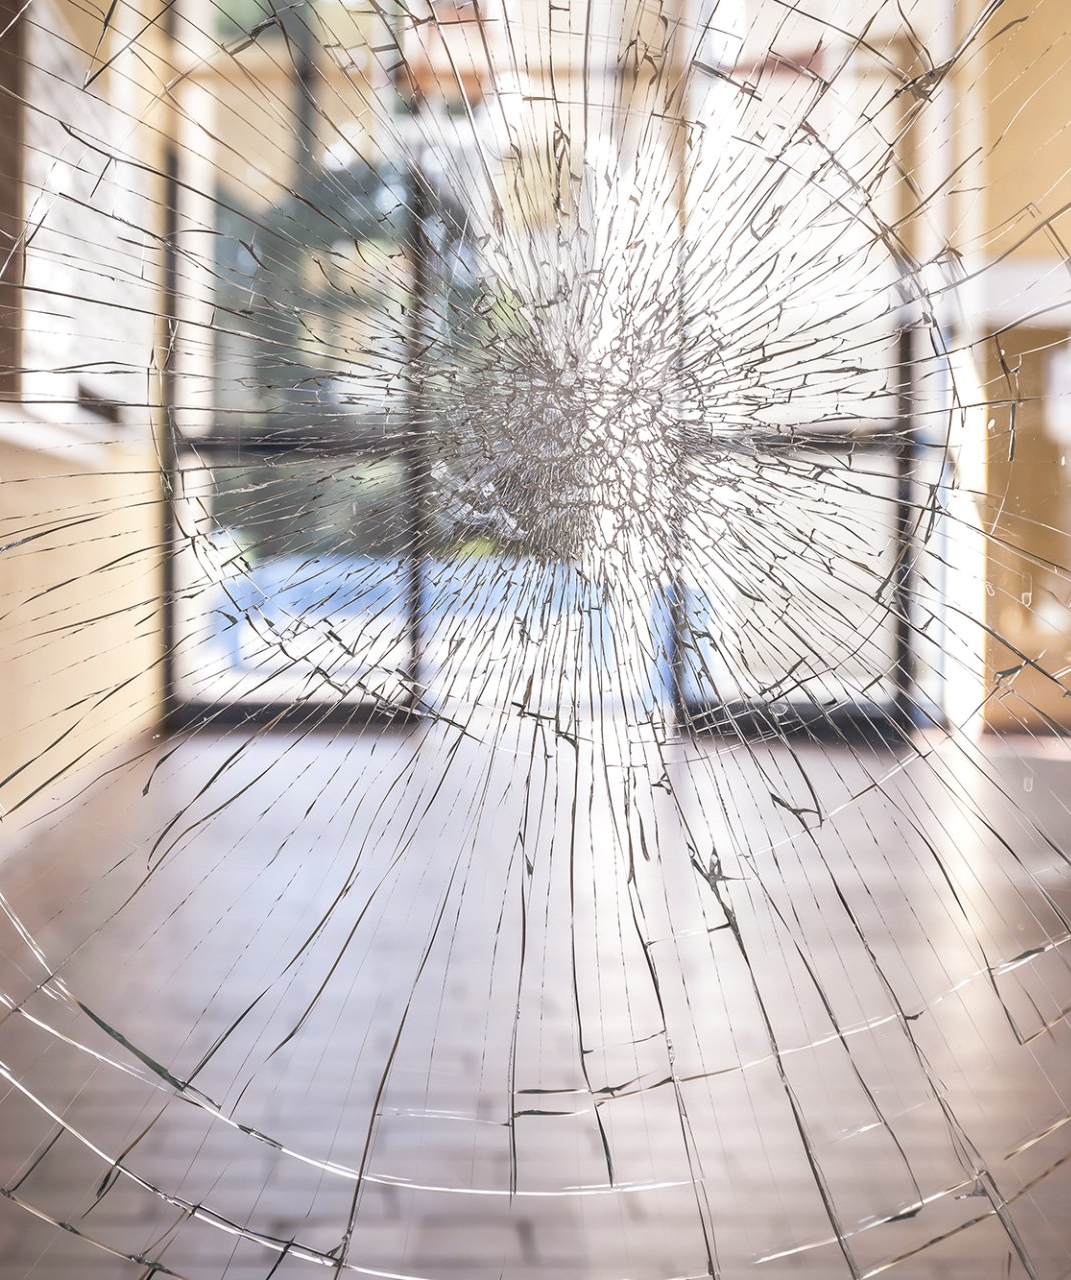 Facing Property Damage Charges in Columbia, MO? Call Harper Evans Hilbrenner & Netemeyer